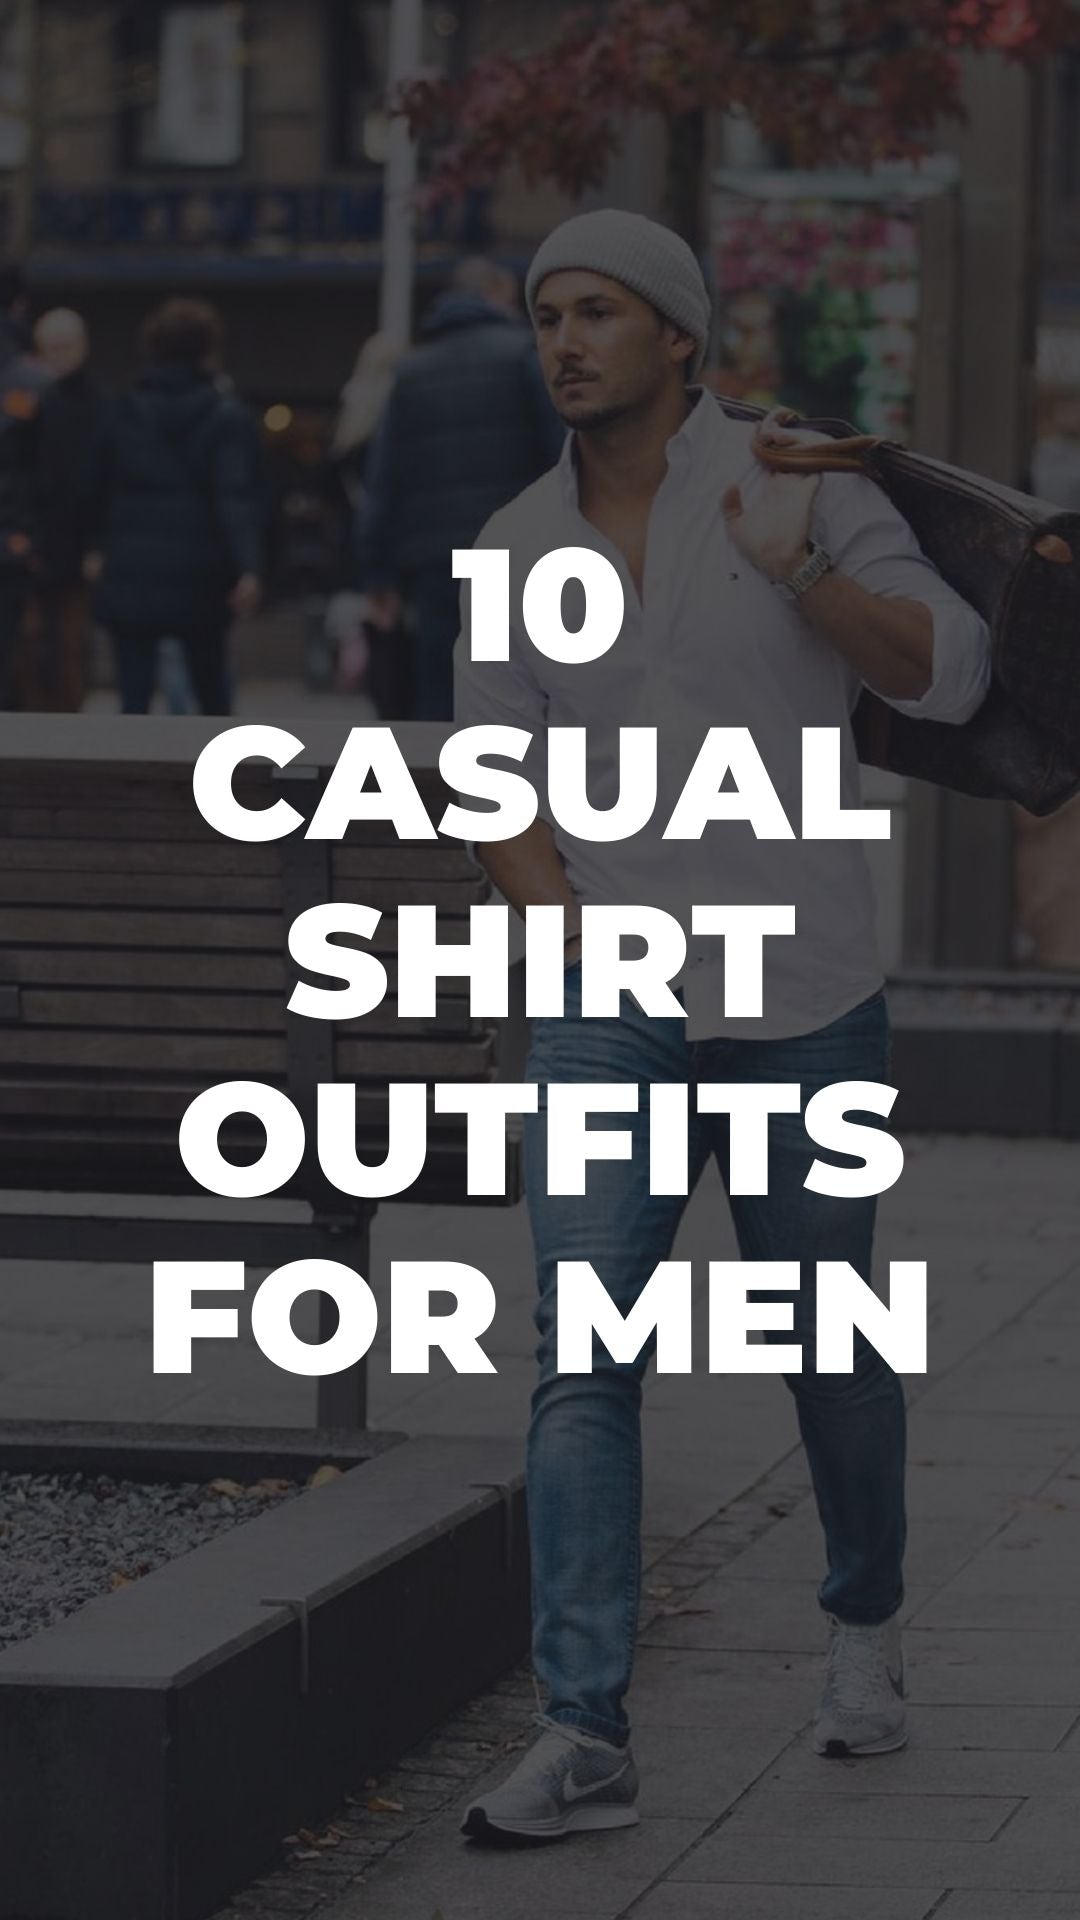 Casual shirt outfits for men. How to wear casual shirt – LIFESTYLE BY PS